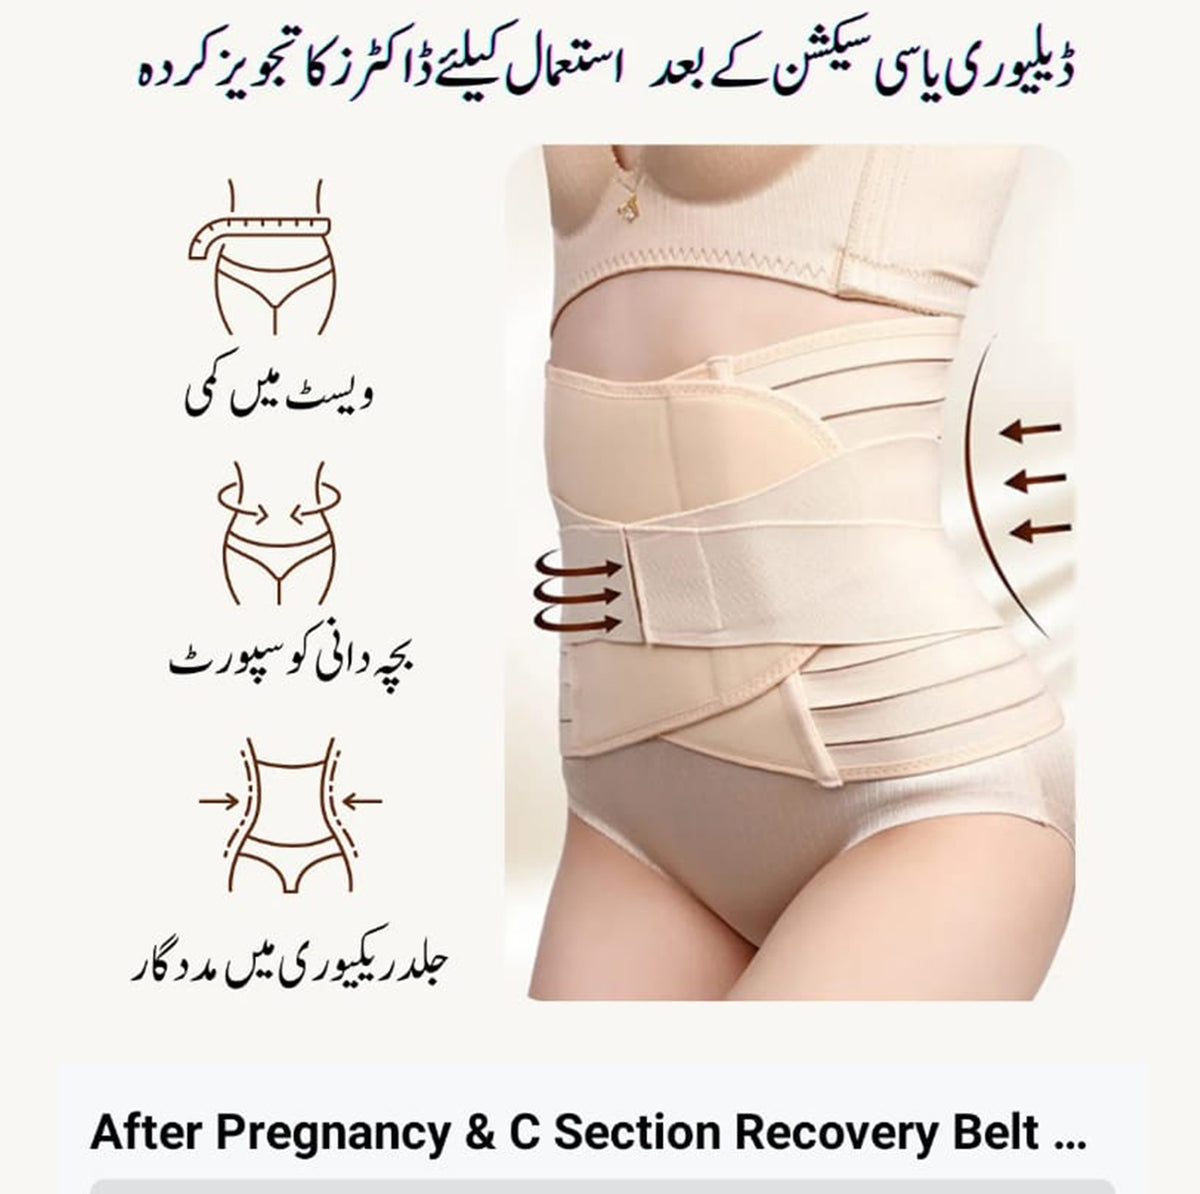 After Pregnancy & C Section Recovery Belt